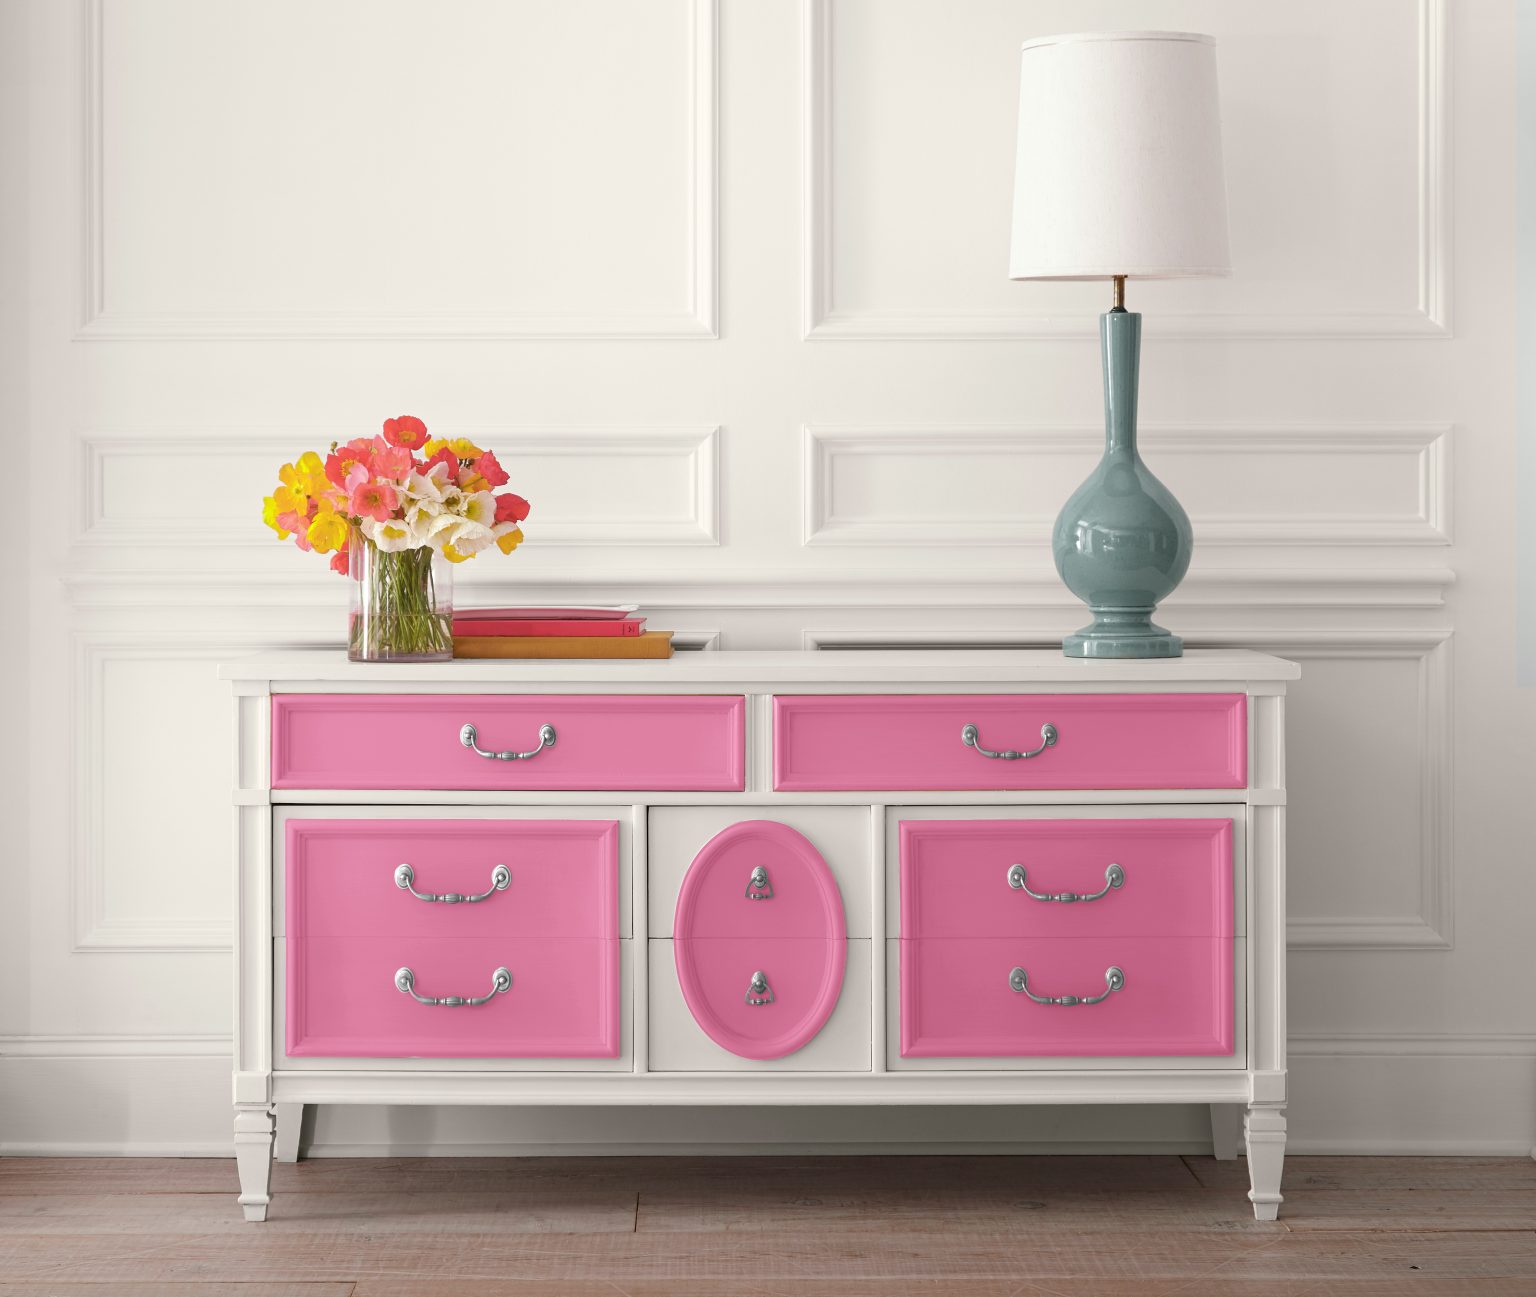 A closeup of a white dresser with doors painted in a bright pink colour and silver handles